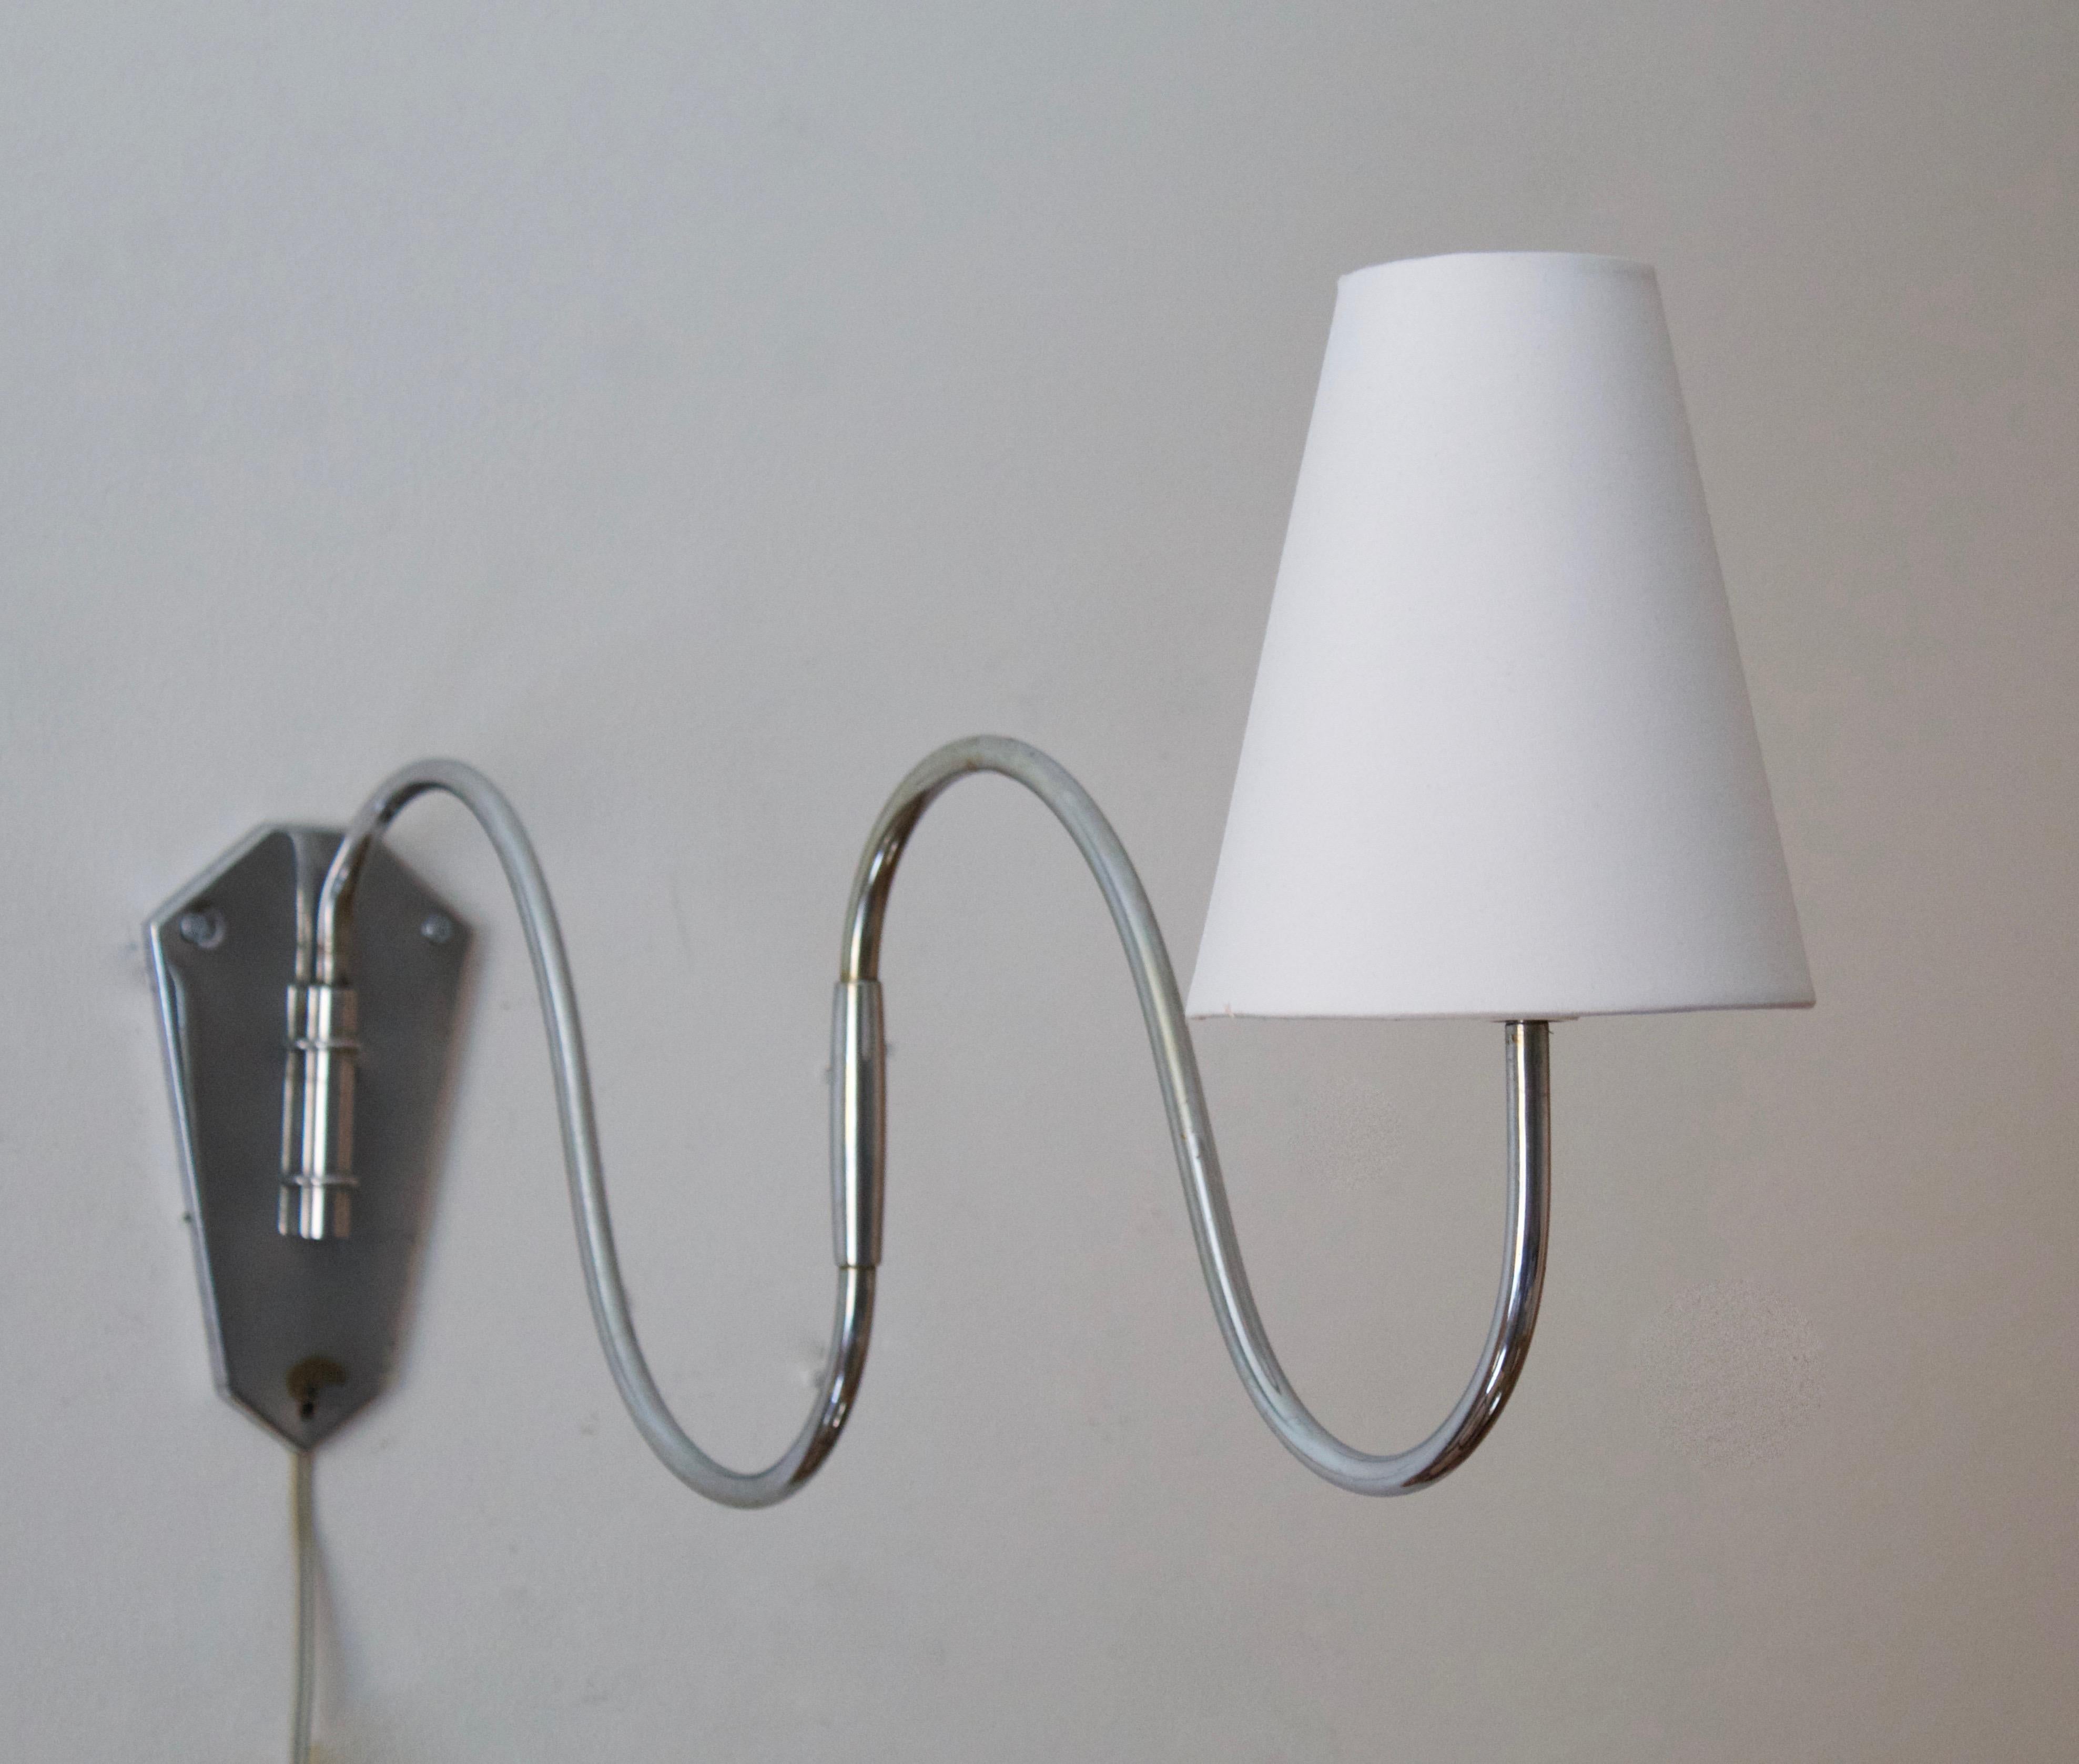 A functionalist wall light / task light, designed and produced in Denmark, 1940s. Features chrome steel. Brand new lampshade.

Stated dimensions with lampshade attached as is illustrated in the primary image.